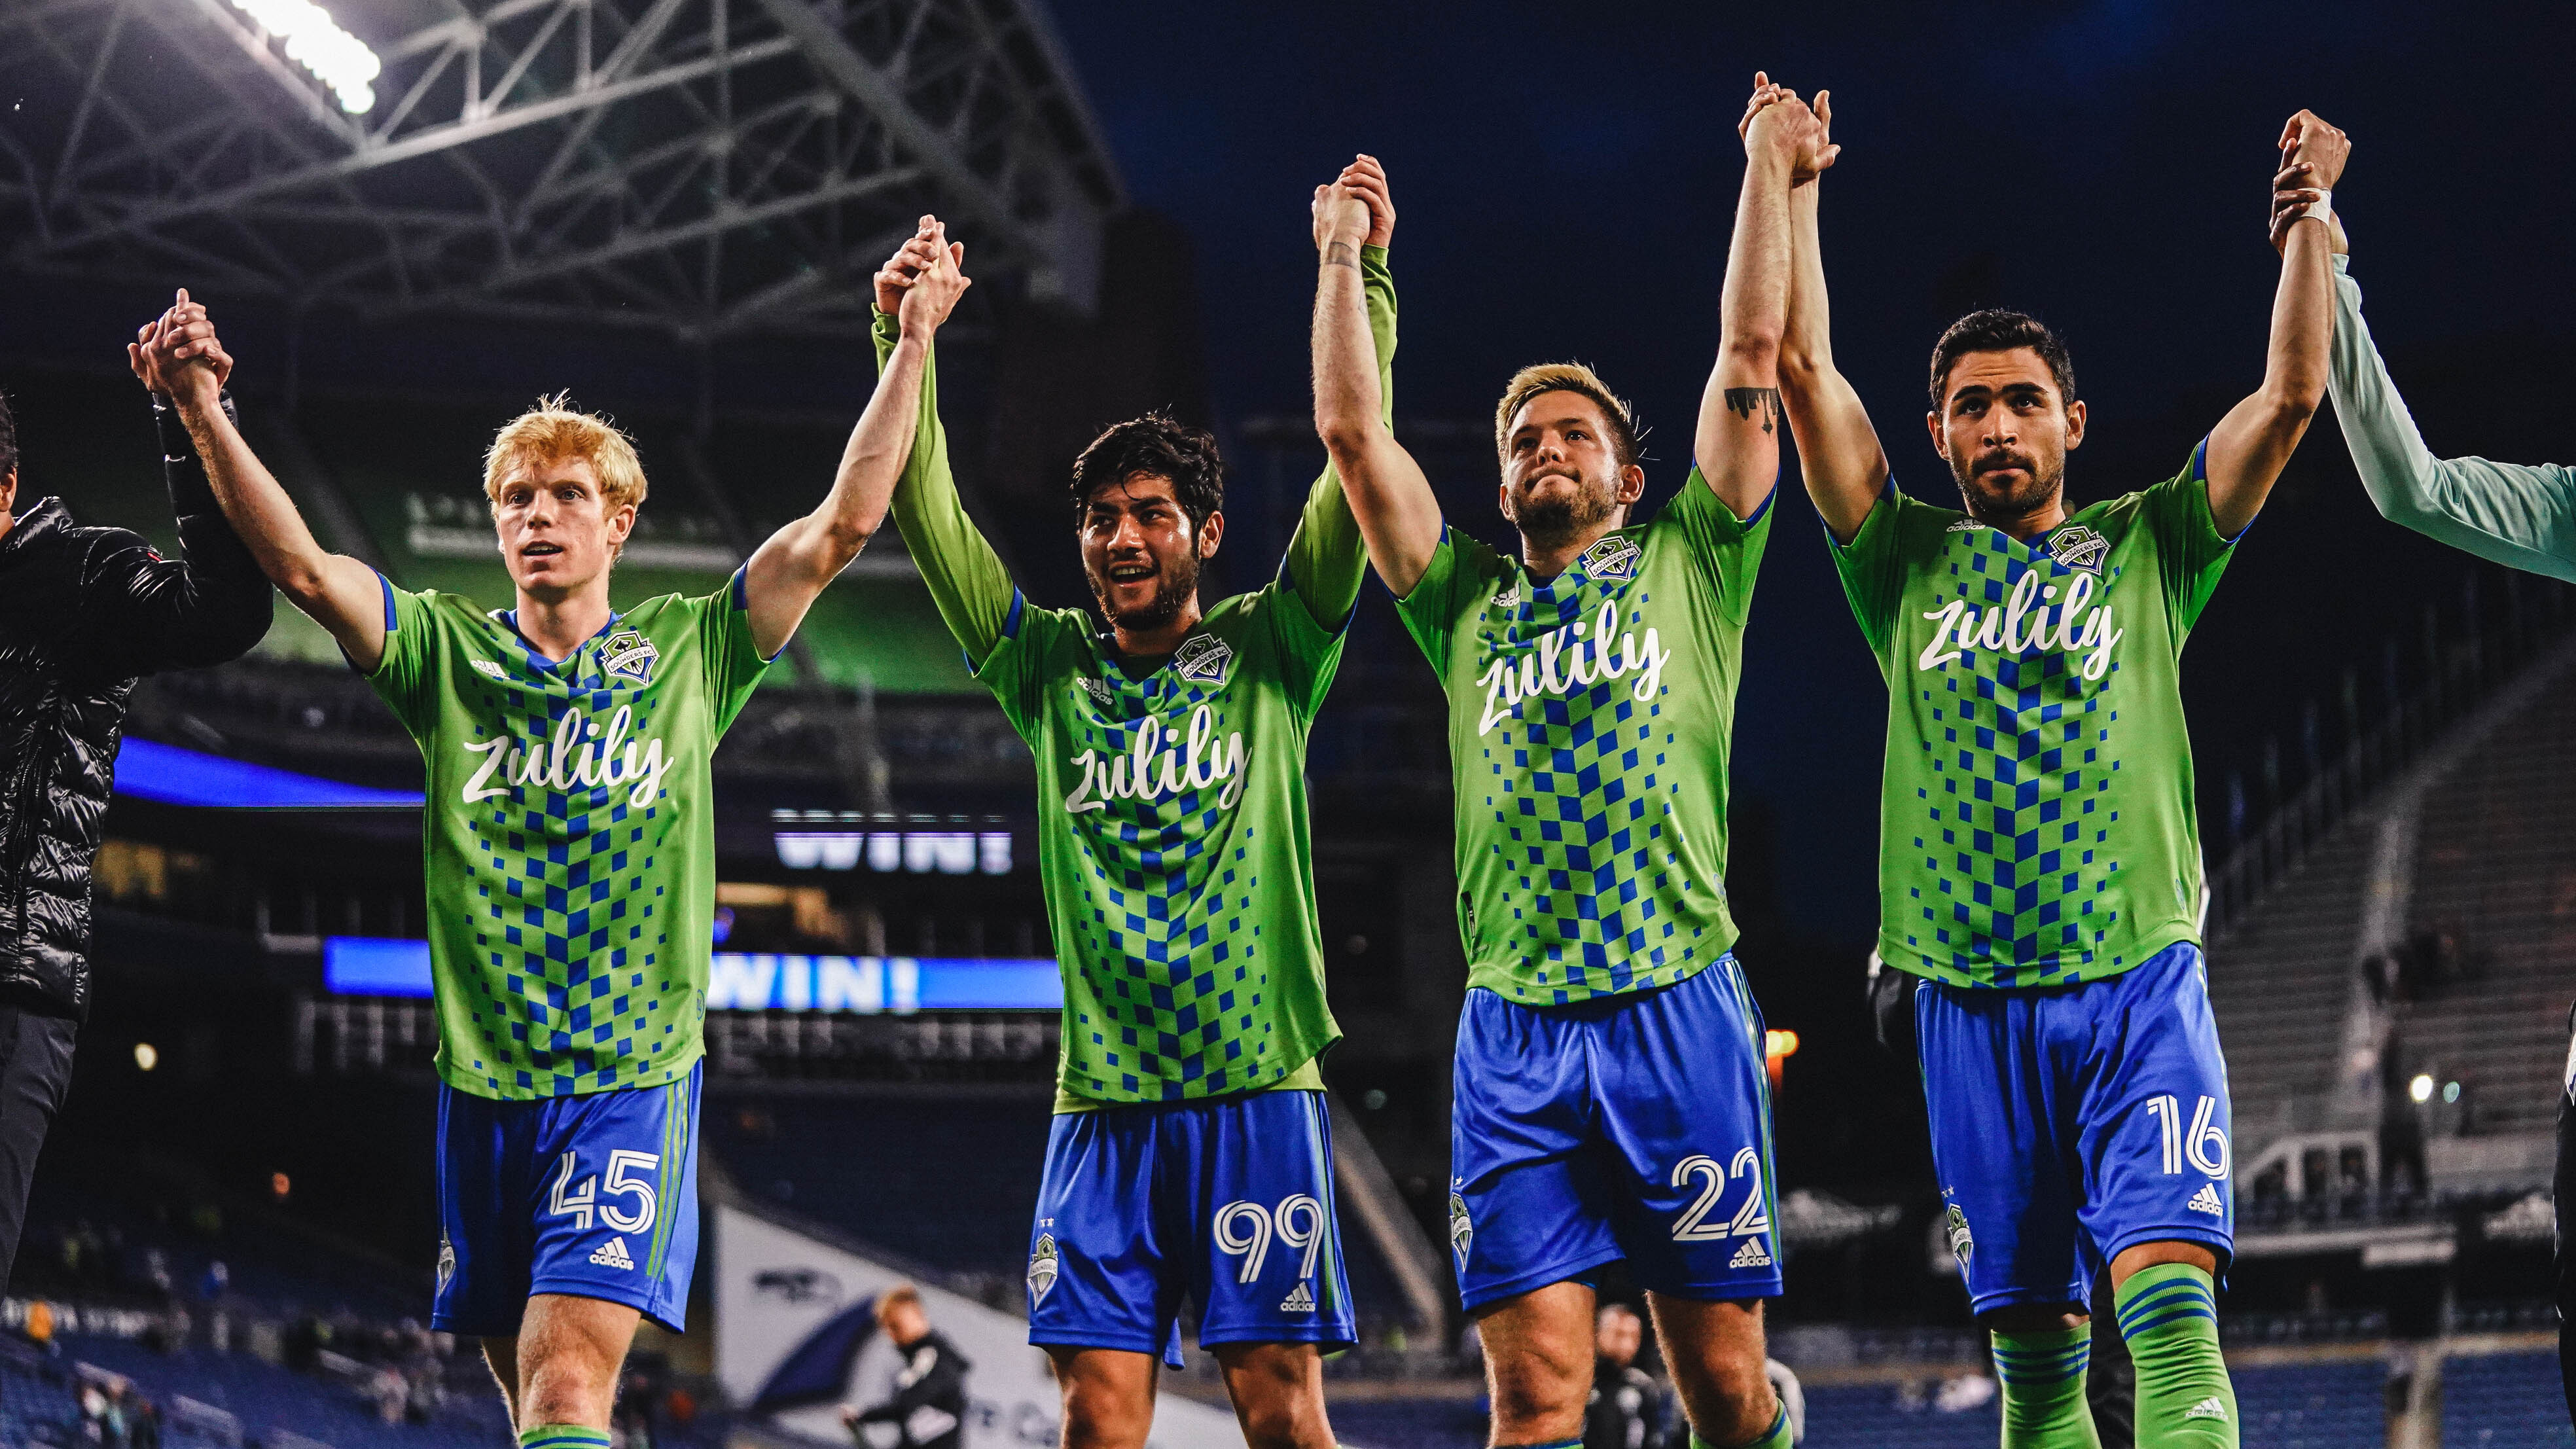 Sounders players celebrating a win